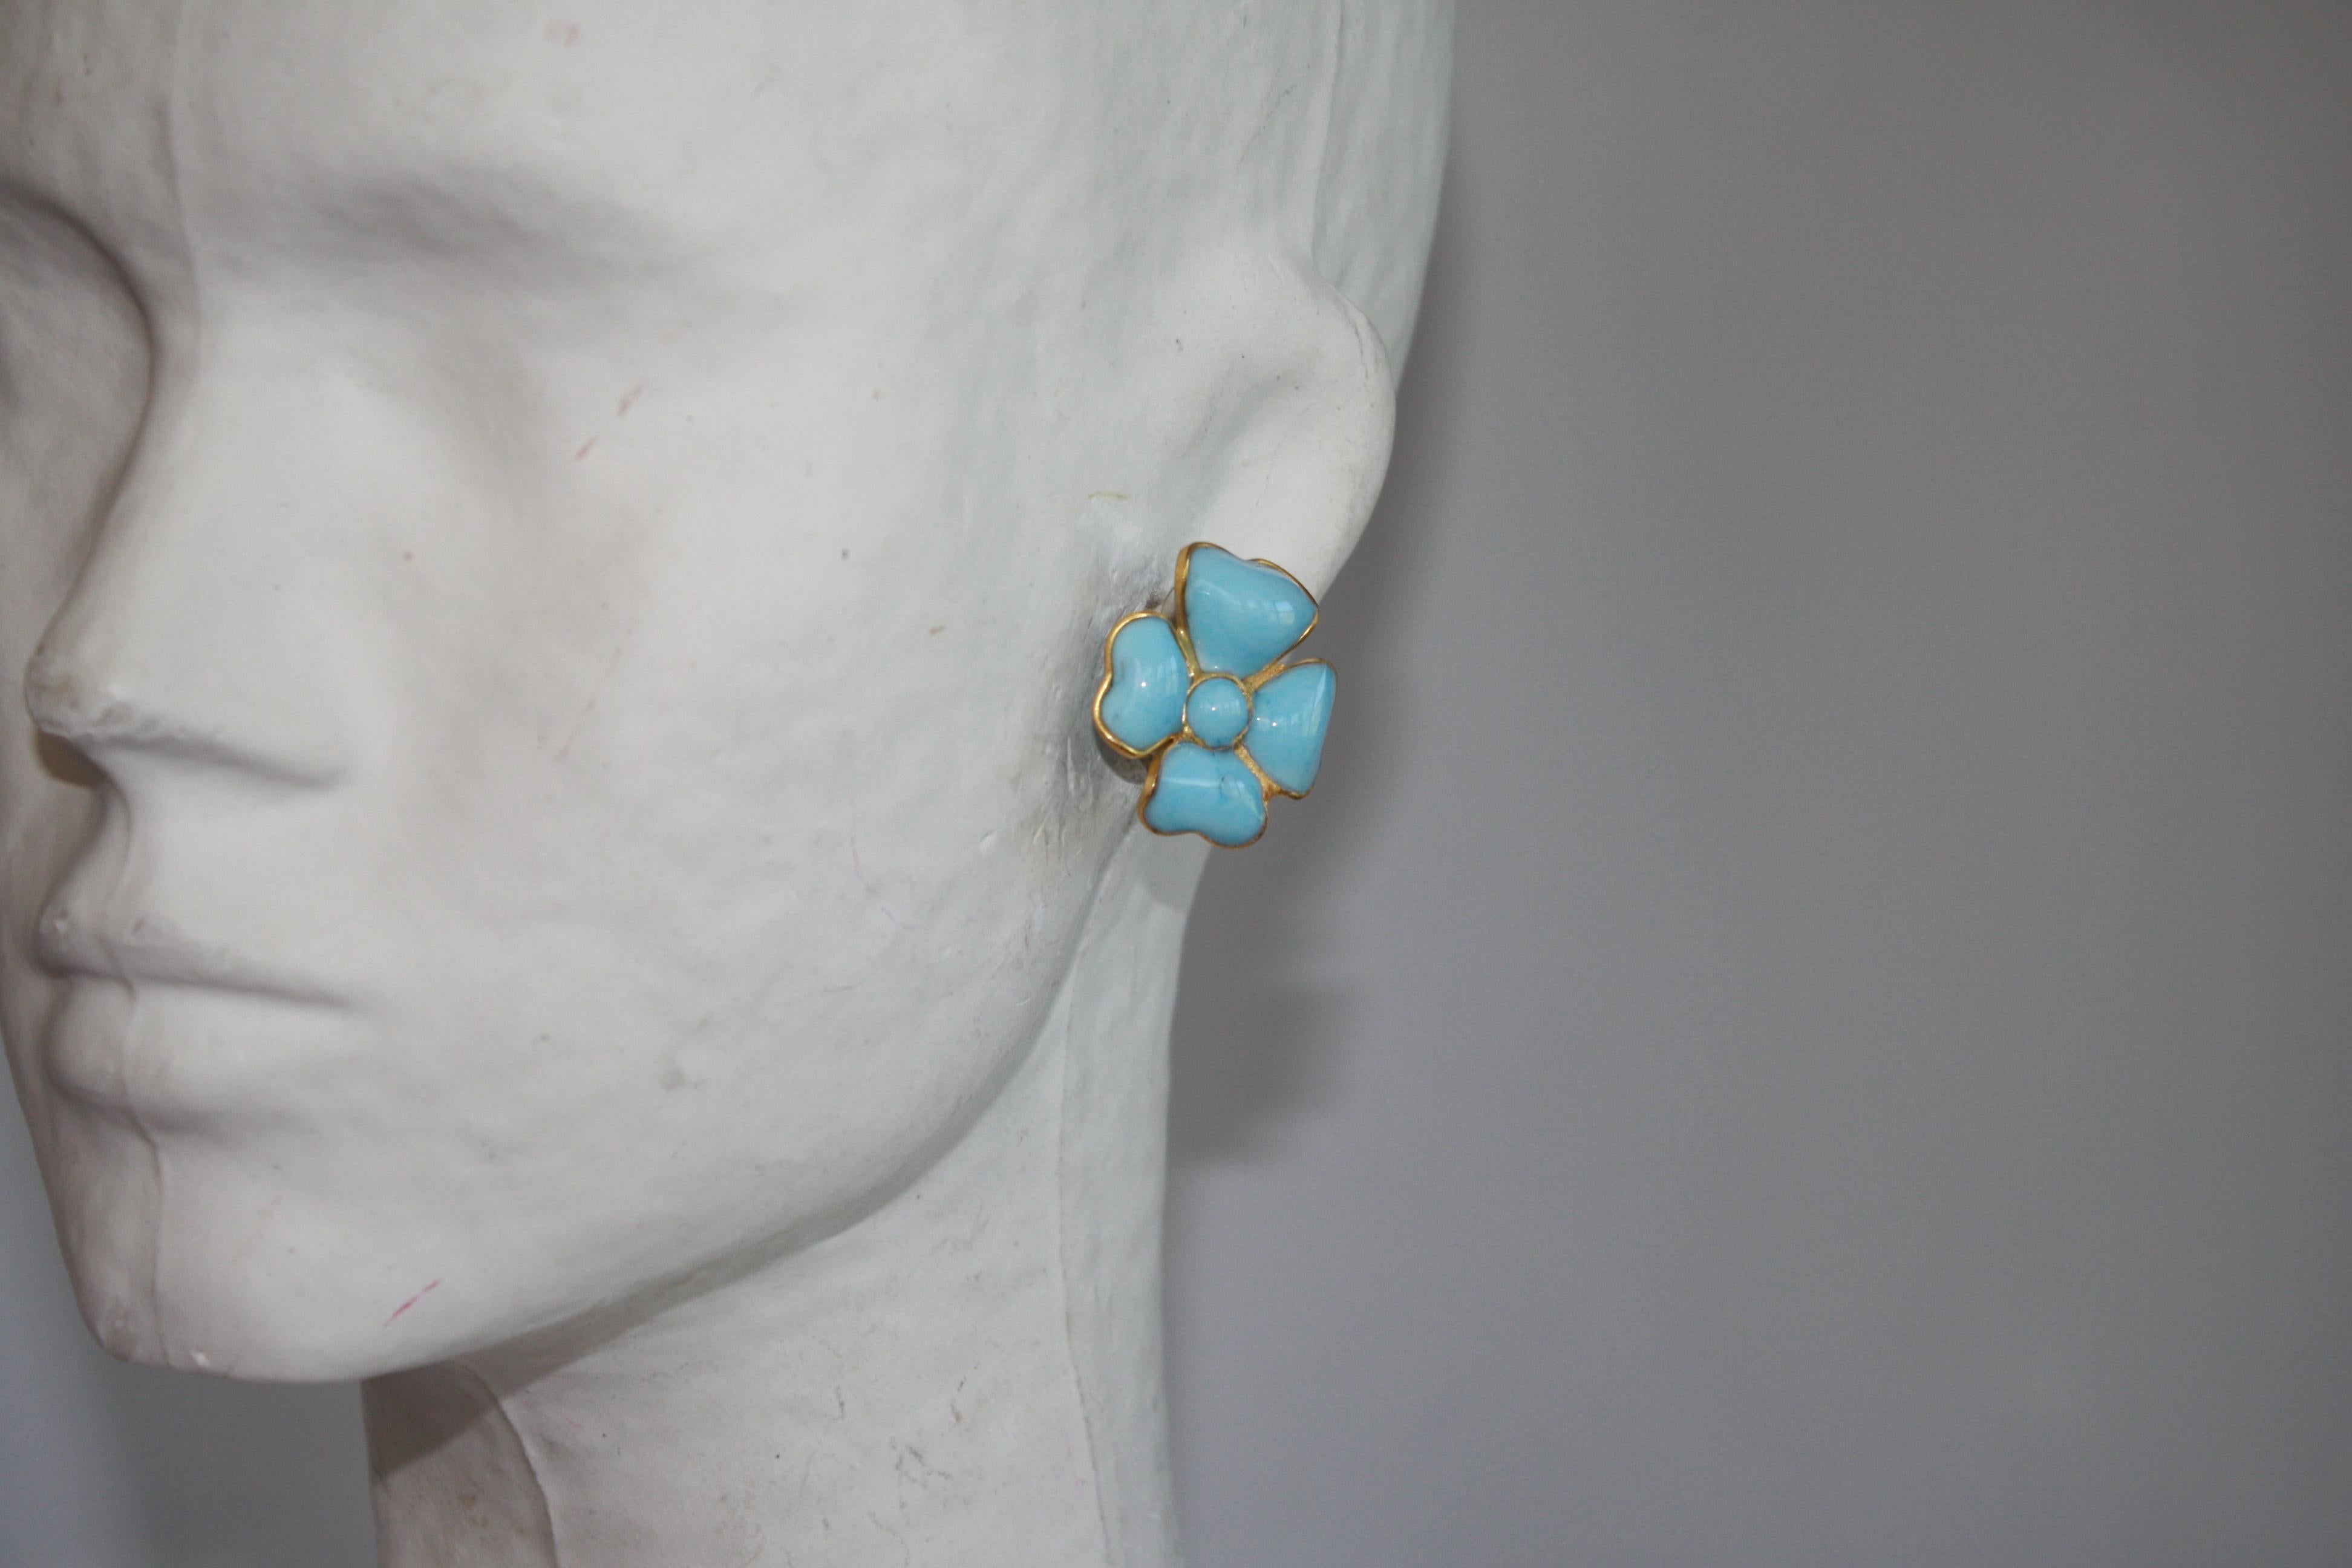 Turquoise poured glass clover clip earrings from French design house Francoise Montague.